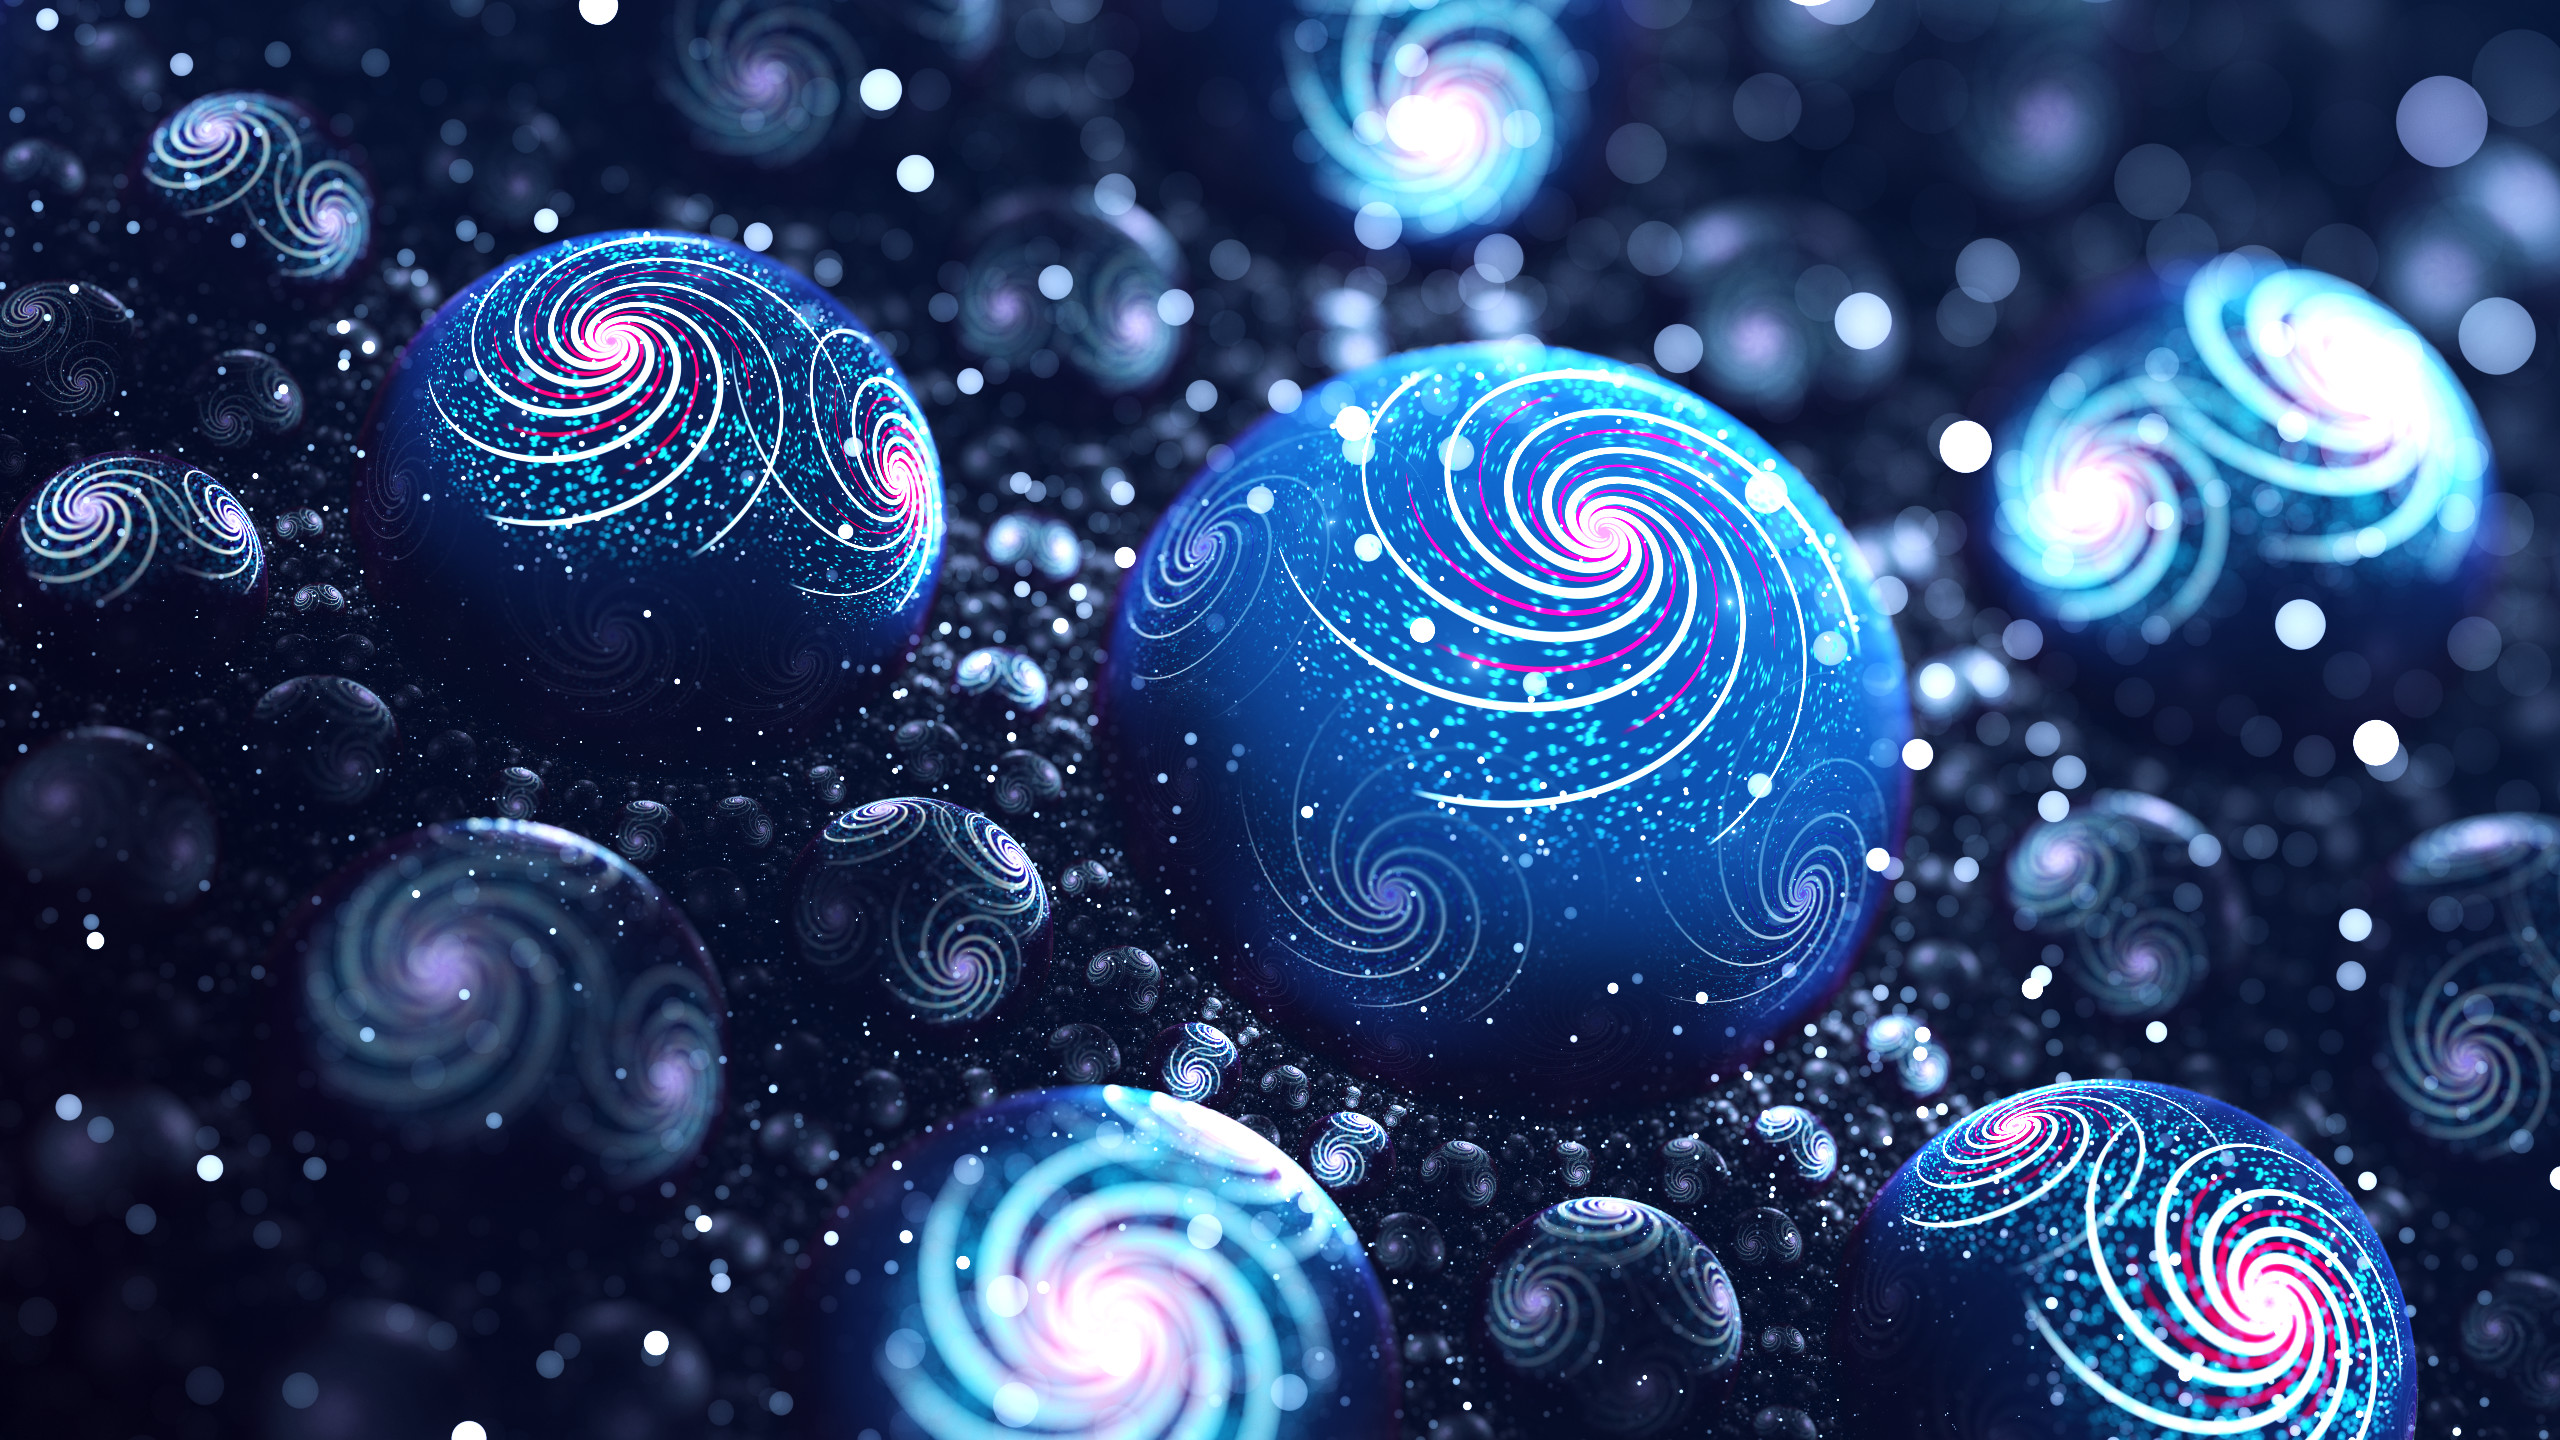 2560x1440 Infinity Galaxy by BoxTail Infinity Galaxy by BoxTail